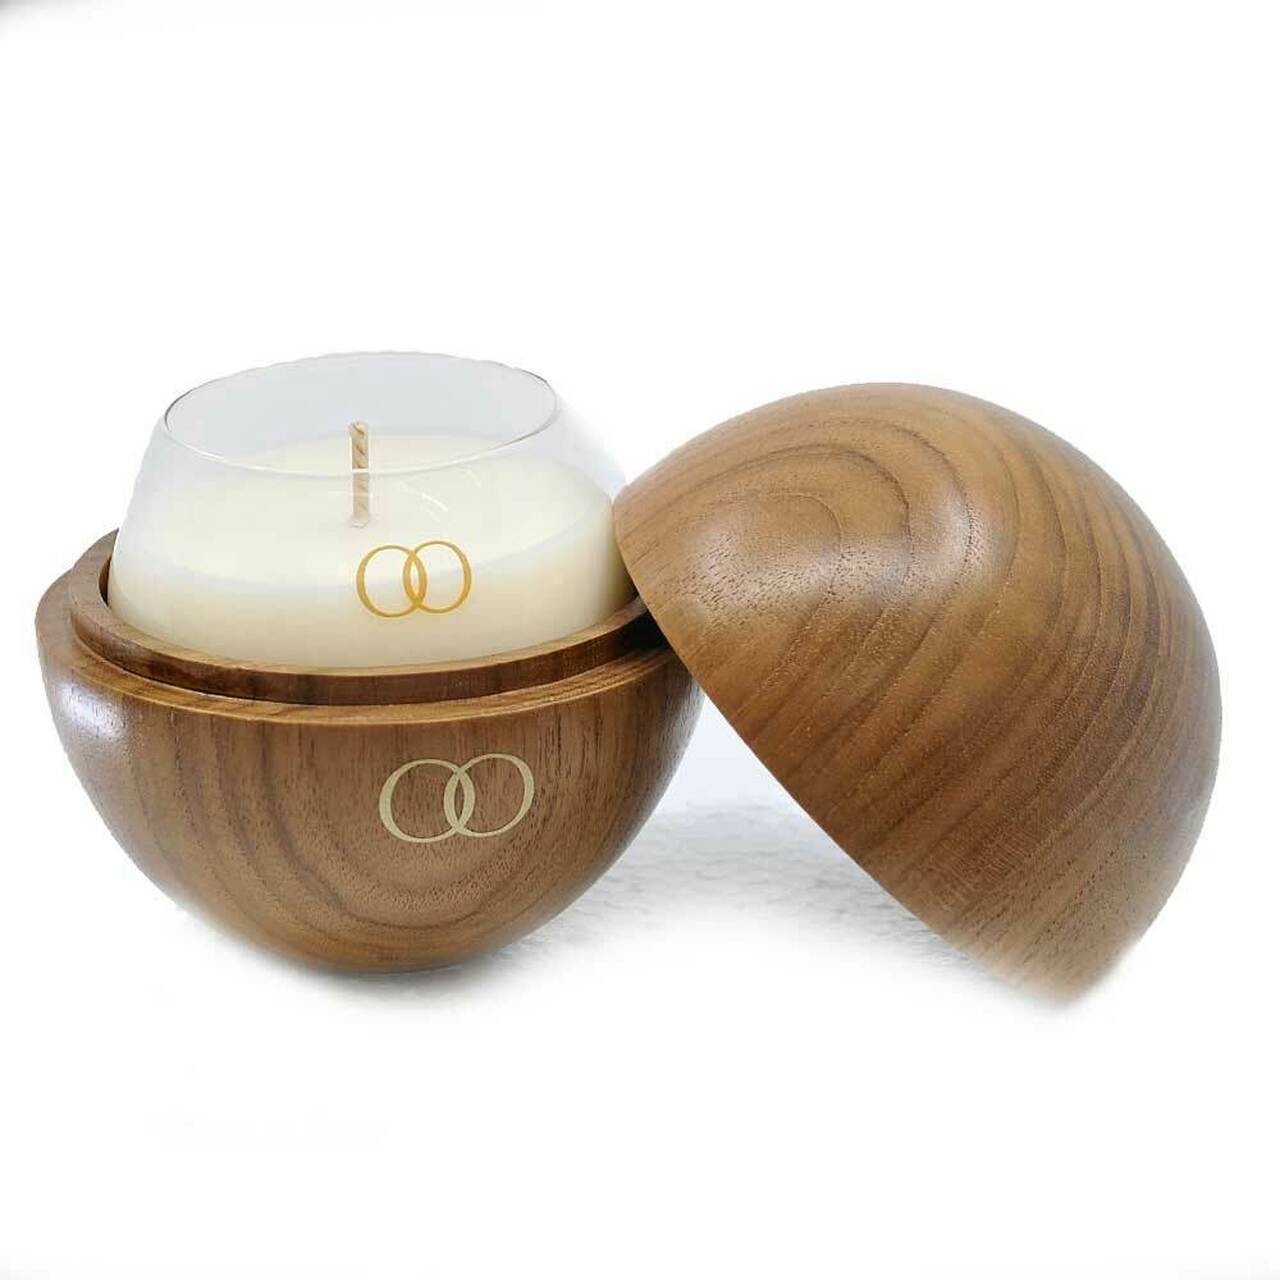 Only Orb Driftwood & Citrus Candle